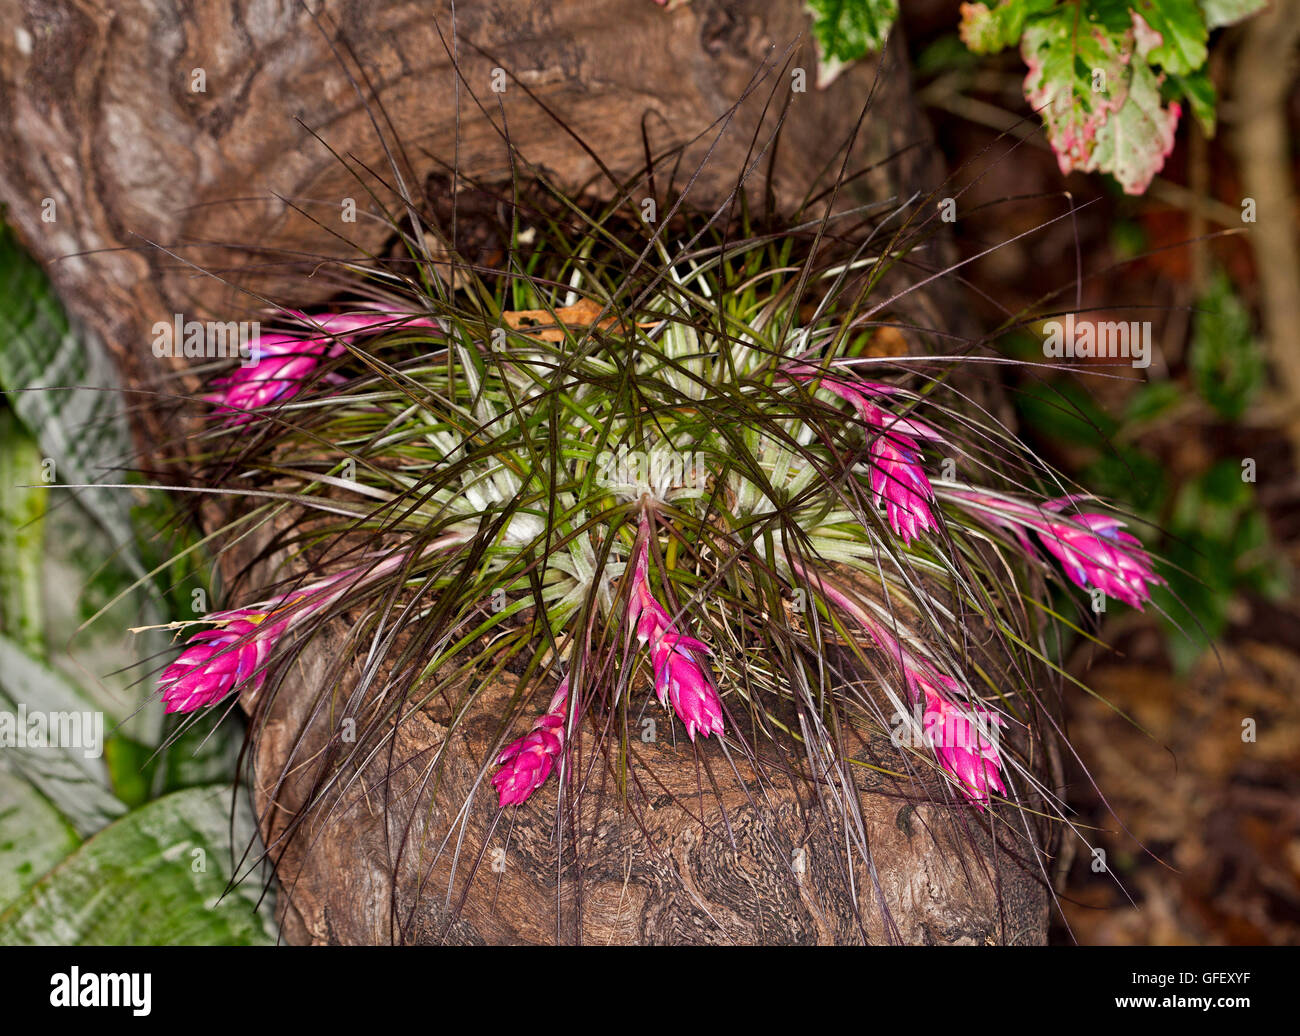 Cluster of bromeliad / air plant Tillandsia stricta with mass of stunning pink and mauve flowers growing on a wooden stump Stock Photo